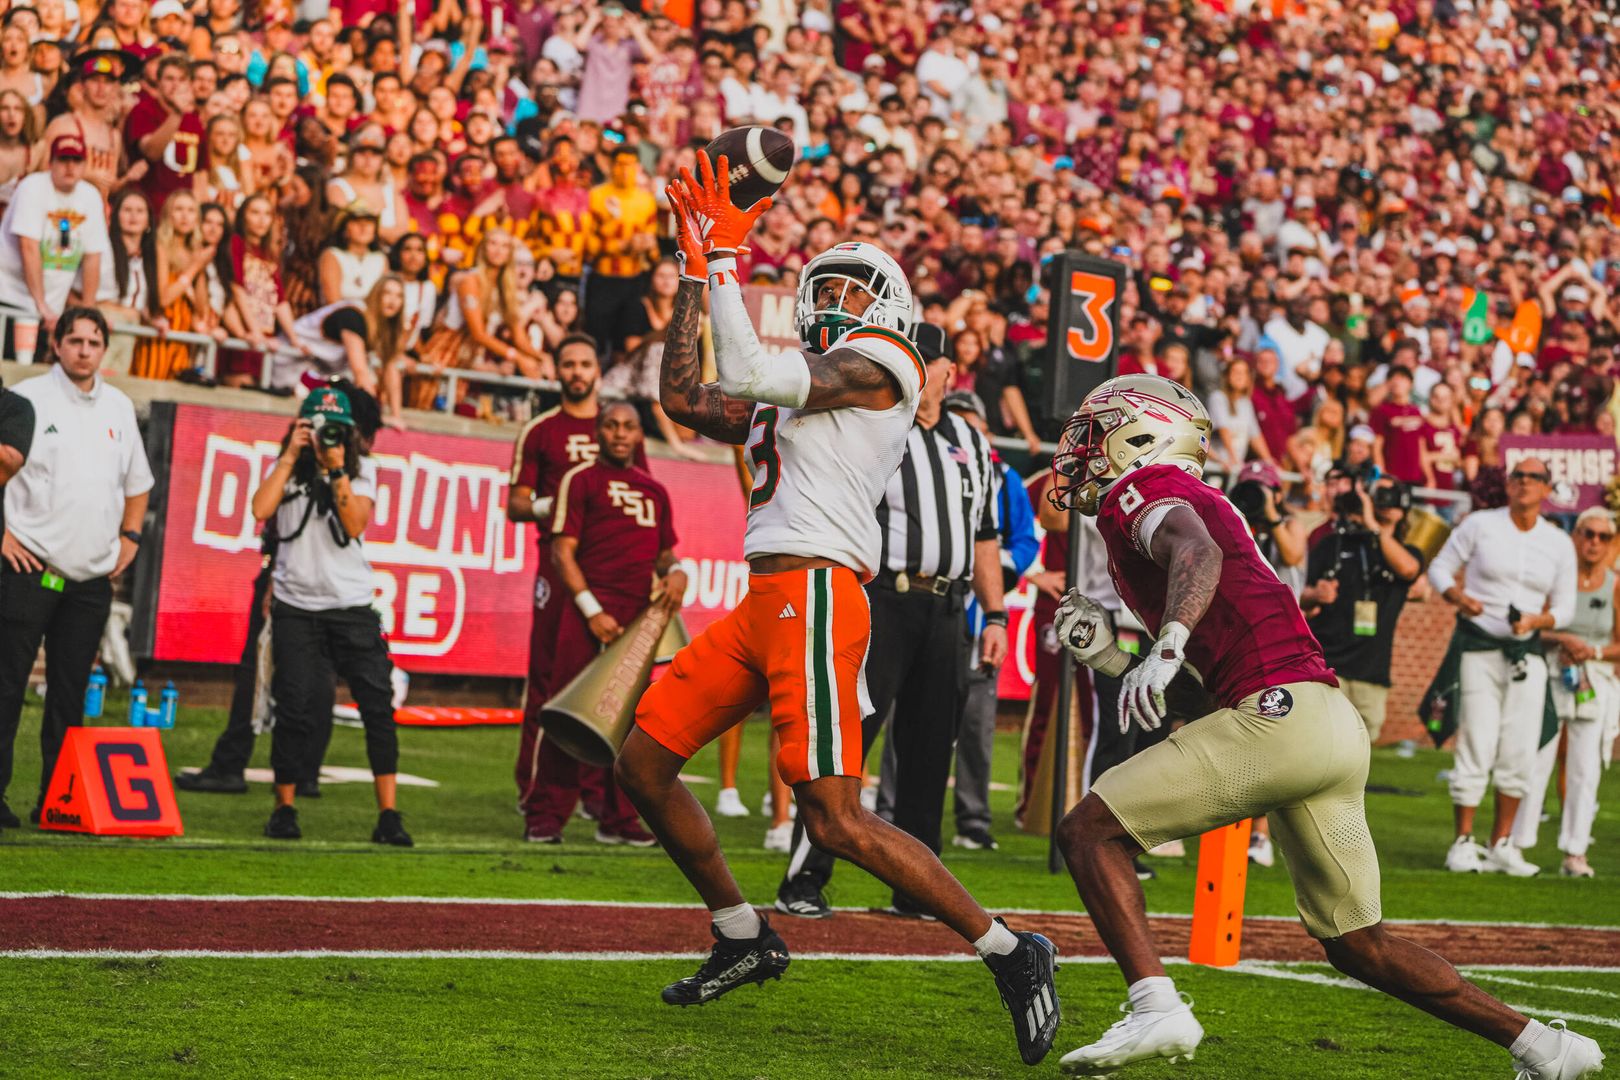 Noles Outlast Canes in Tallahassee